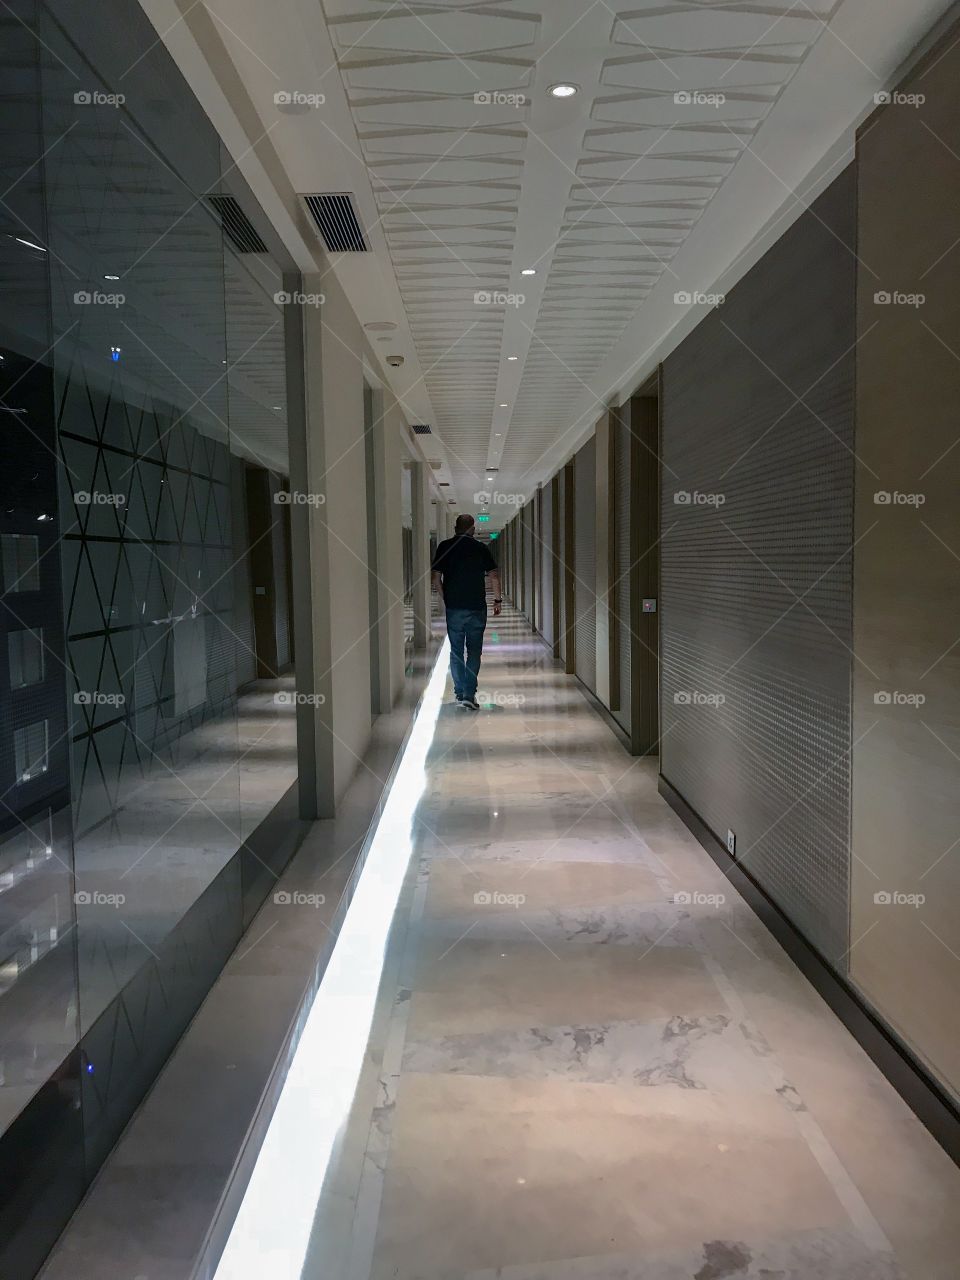 Walk along the lit corridors of the hotel ...with light, mirrors & length...